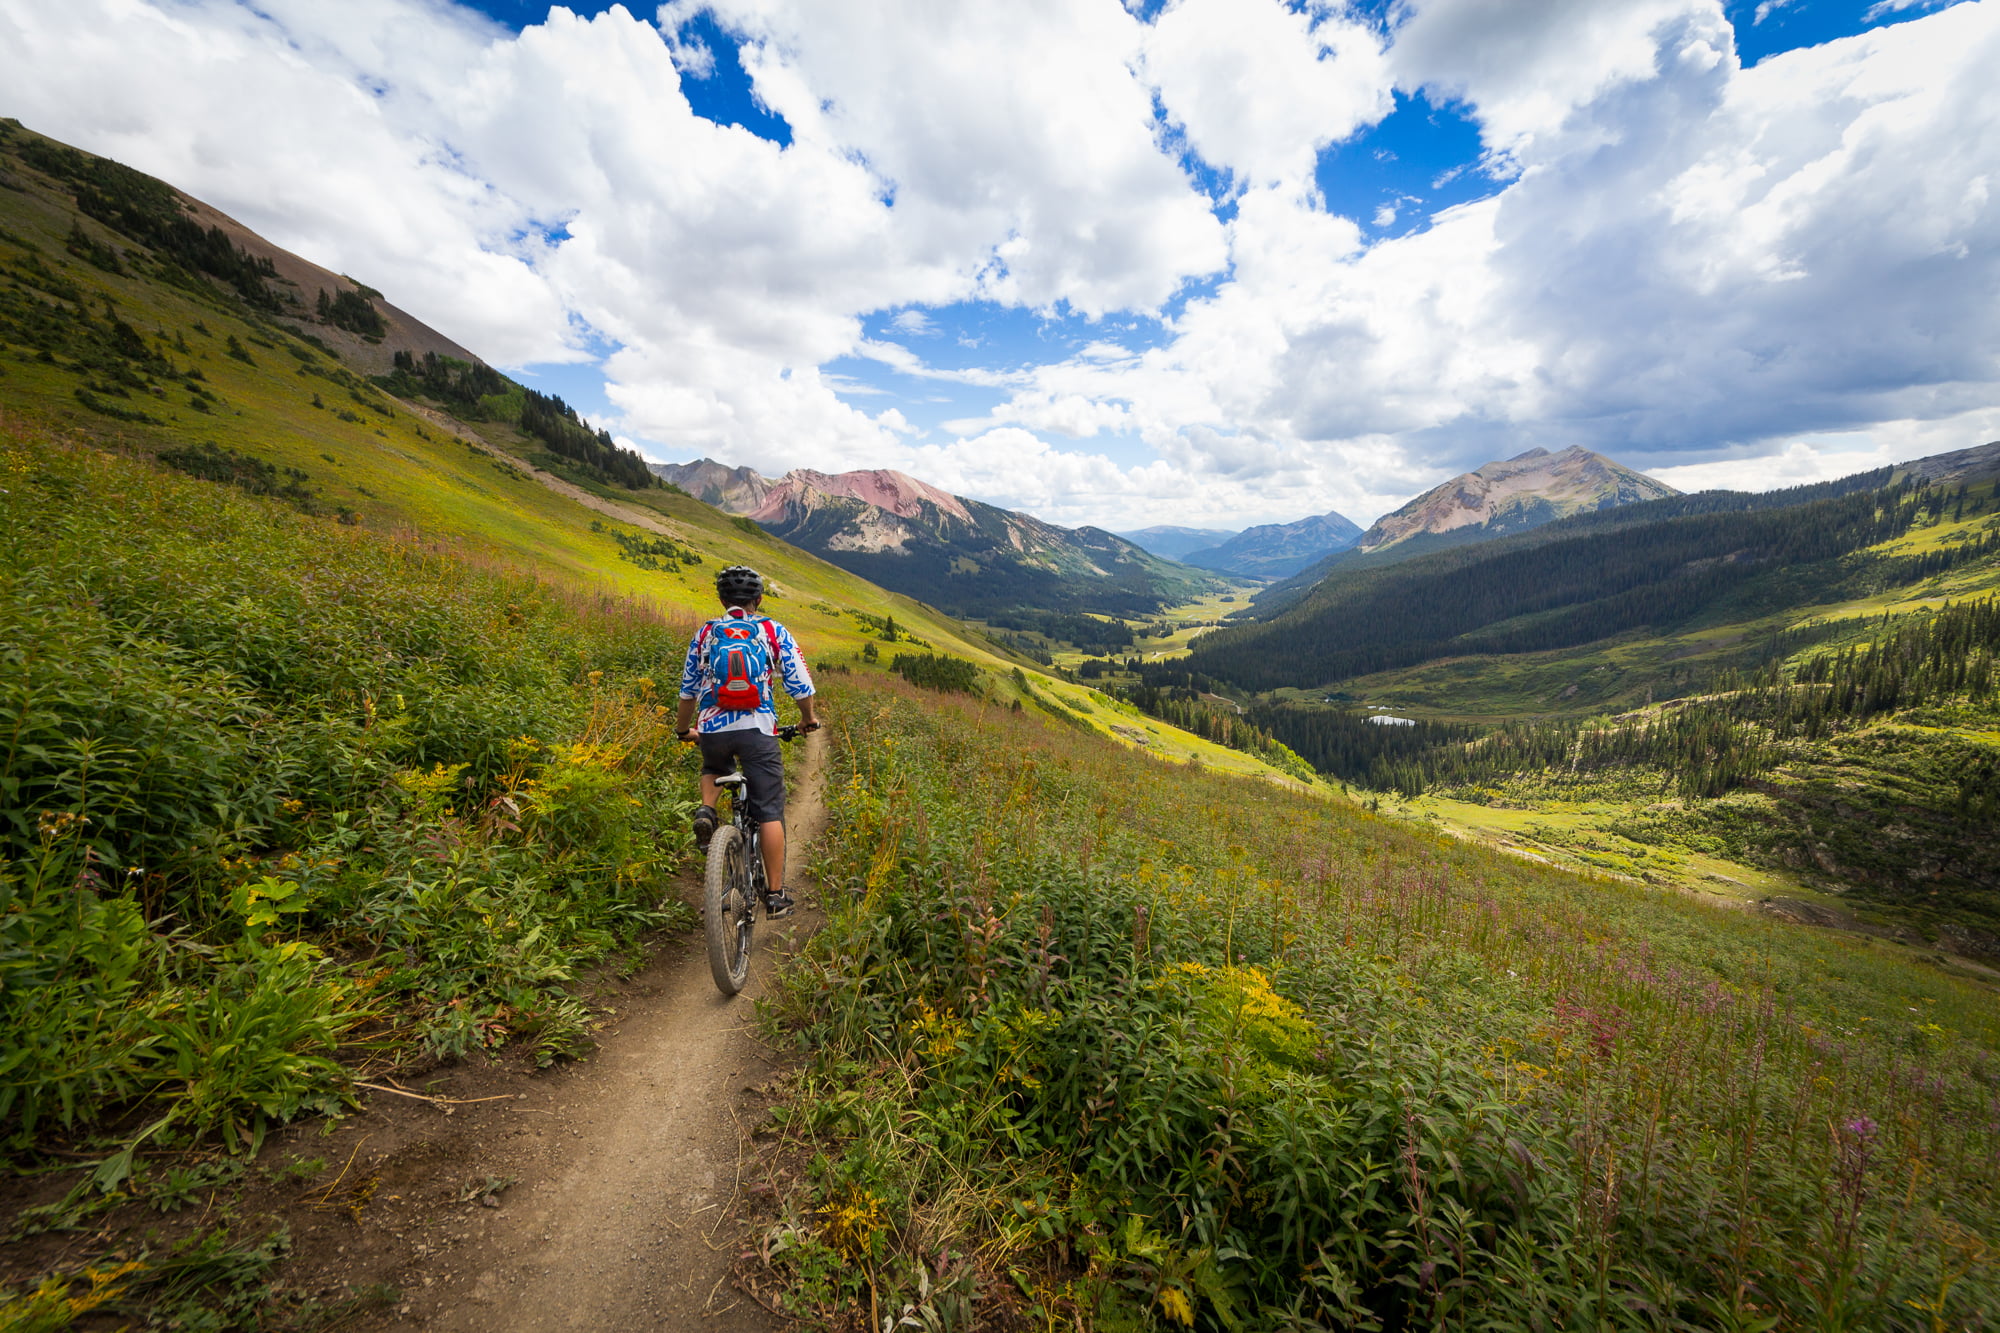 man riding mountain bike on pathway near green grass during daytime, crested butte